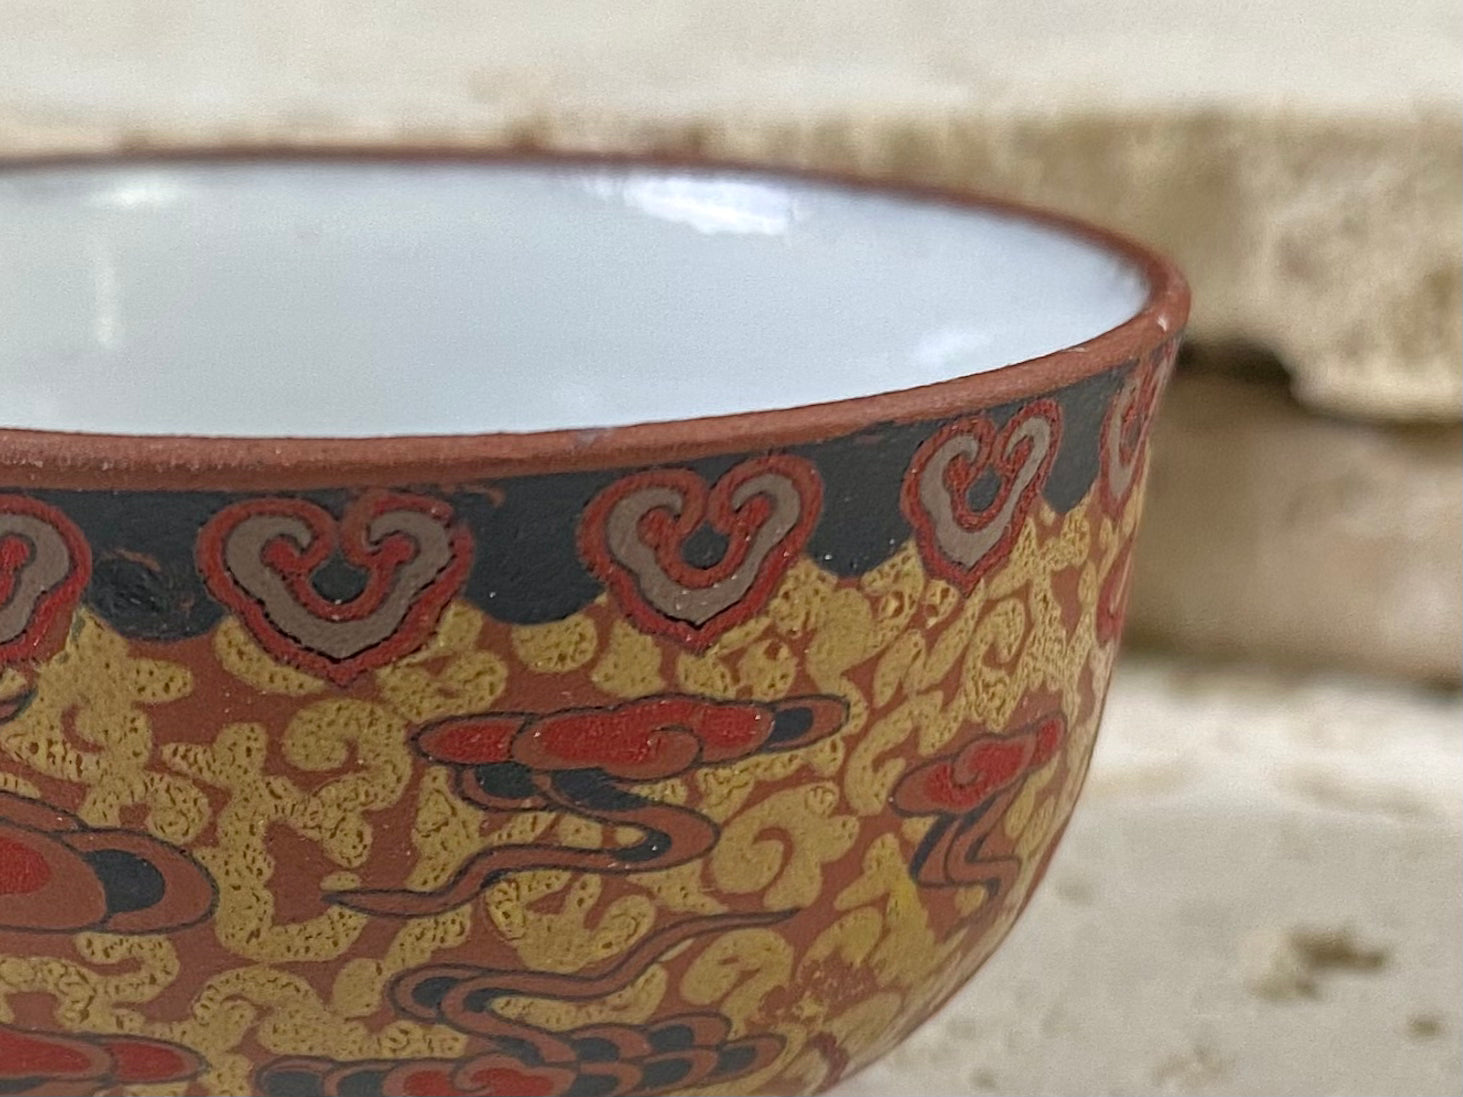 These tiny tea bowls are made from fired clay, glazed on the inside and beautifully decorated on the outside with a pattern of cloud spandrels. Stamped with the makers mark on the base. From Nepal.  As well as tea bowls, these make beautiful miniature offering bowls and when filled with sand, are perfect for holding incense sticks in the Chinese style.  Measurements: 3 cm height, diameter at top 5 cm